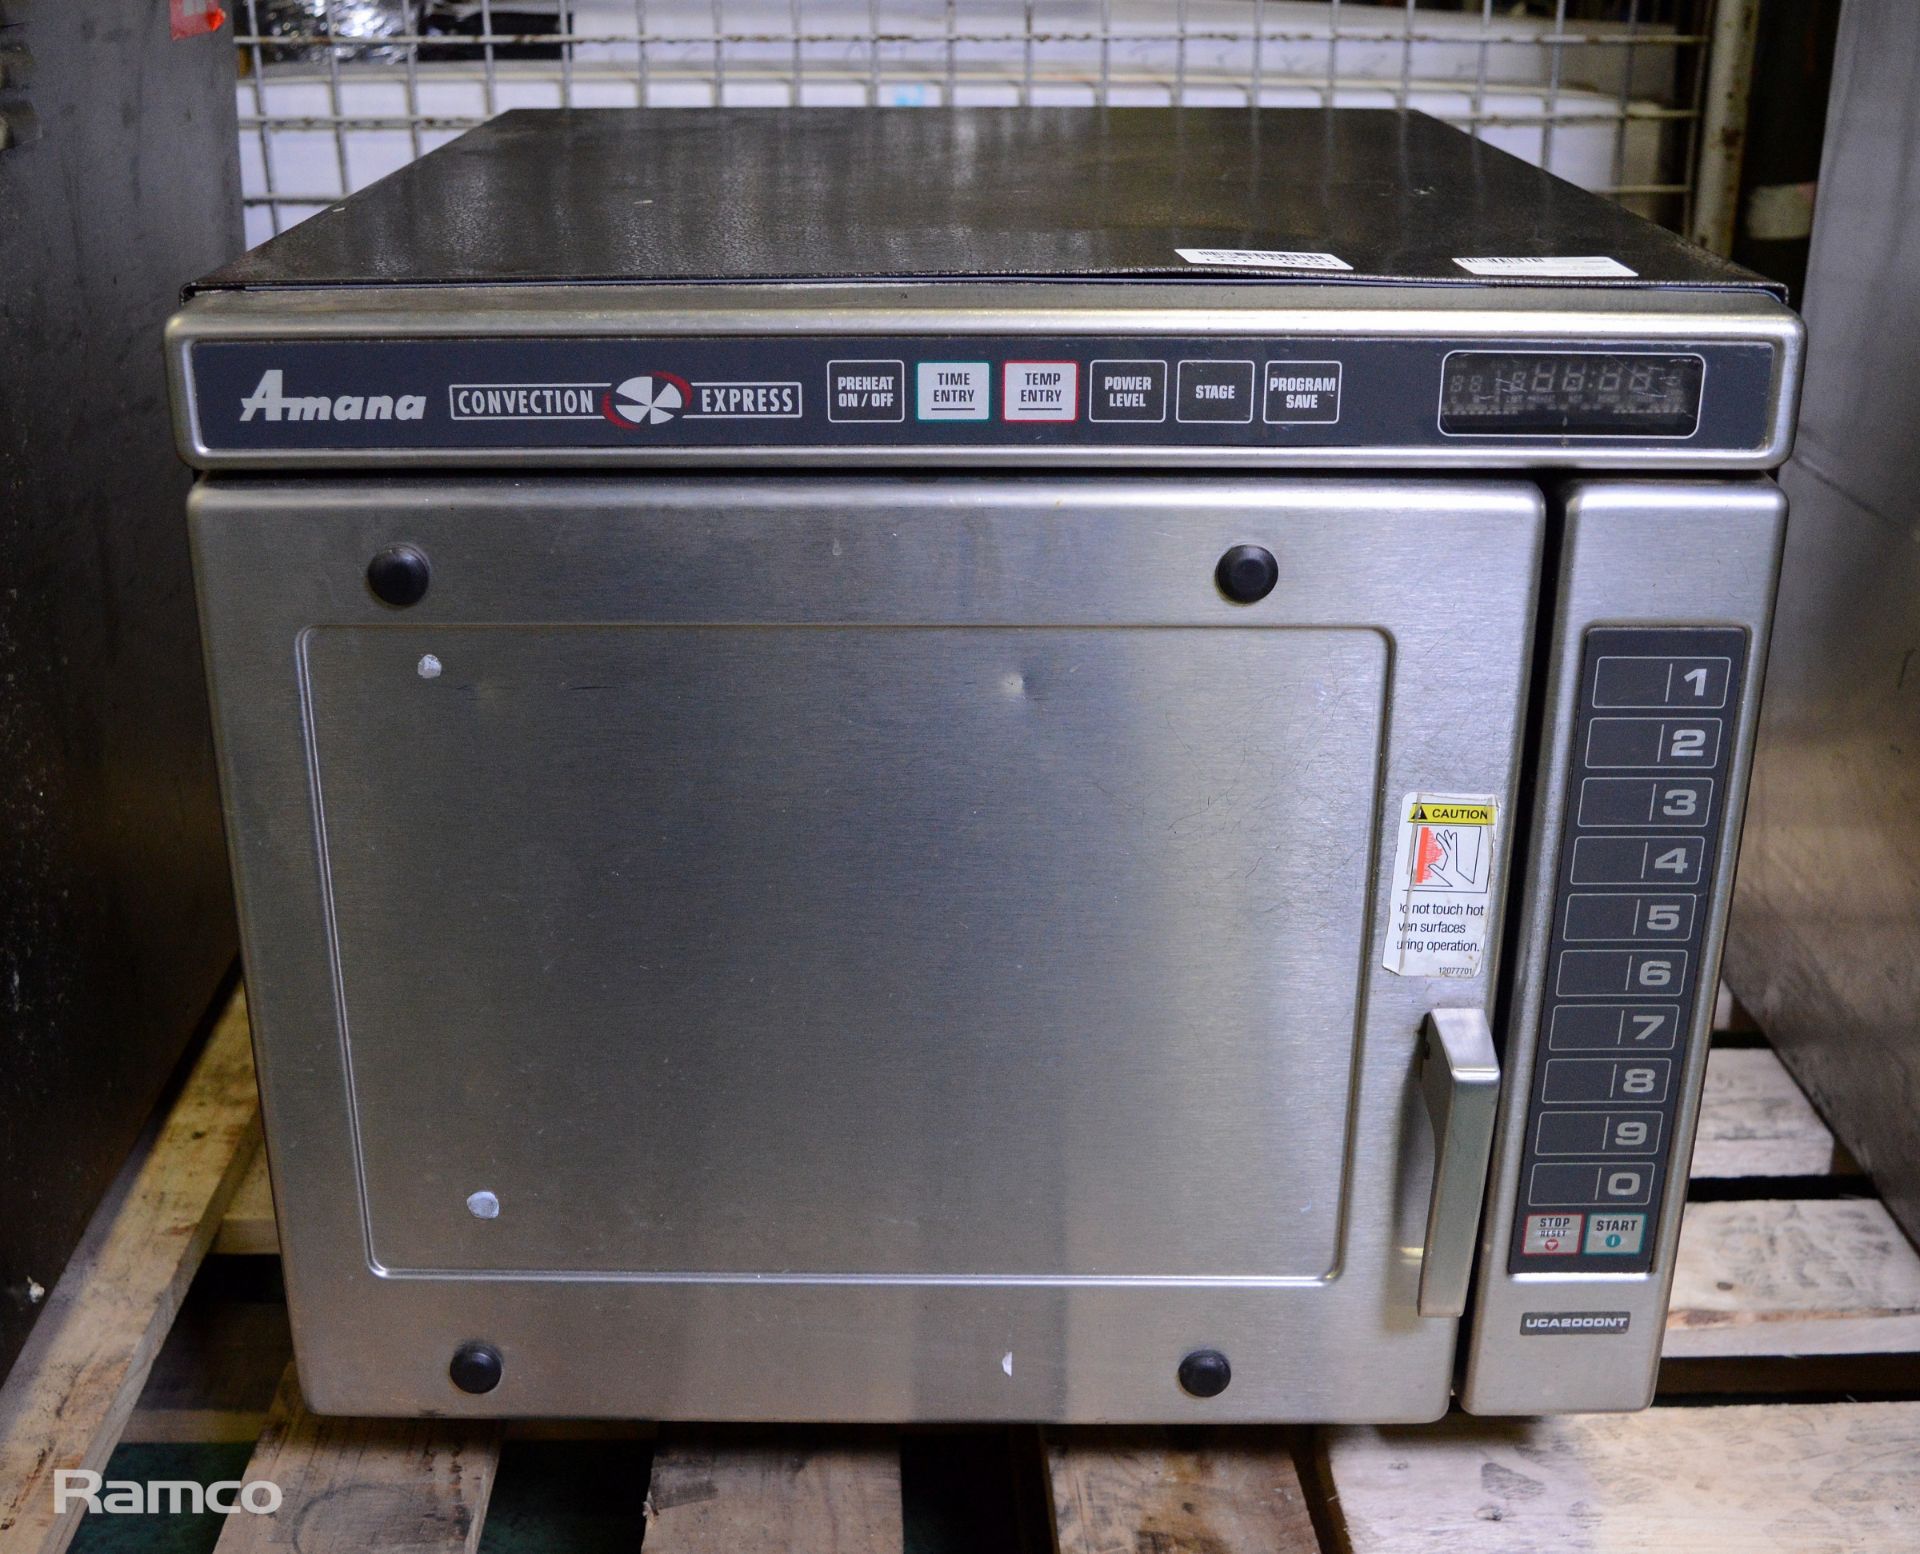 Amana Convection Express Hi-speed cooking oven - Image 2 of 5